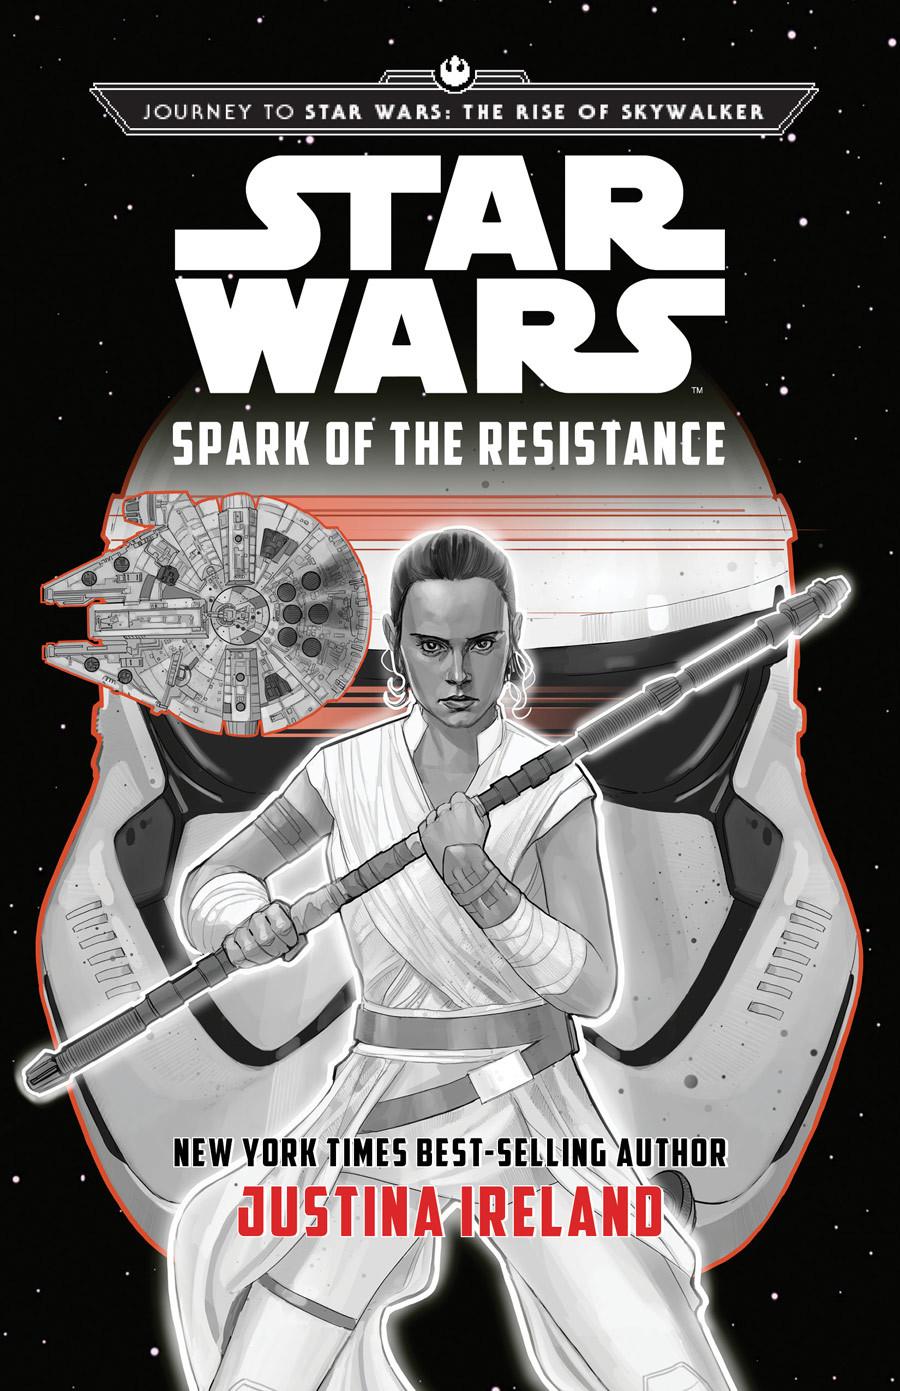 Spark of the Resistance